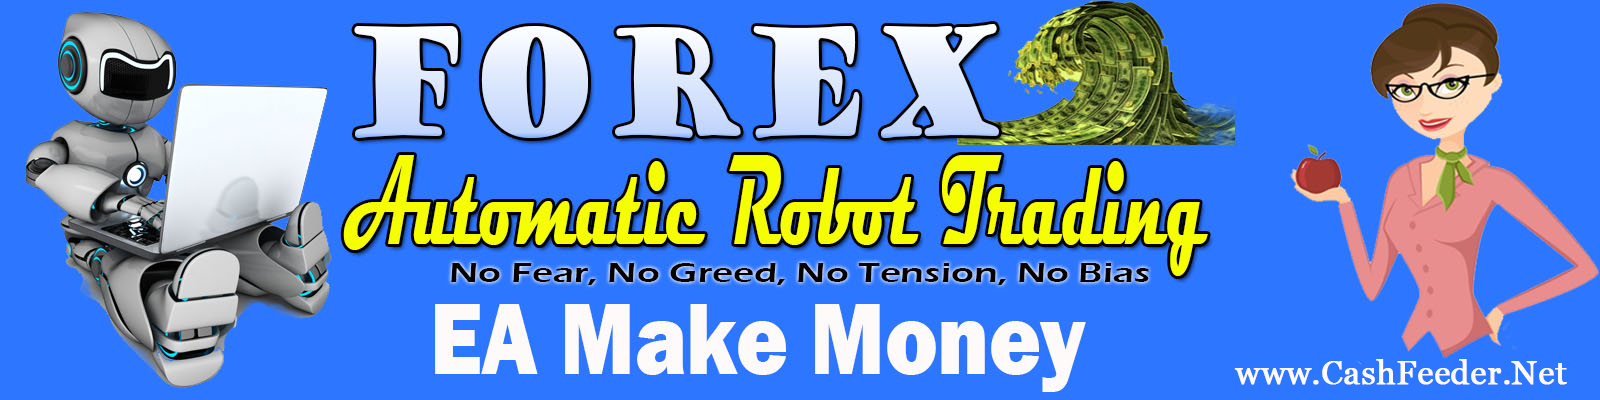 Tamil Forex Automated Ea Robot Trading Cashfeeder Net - 